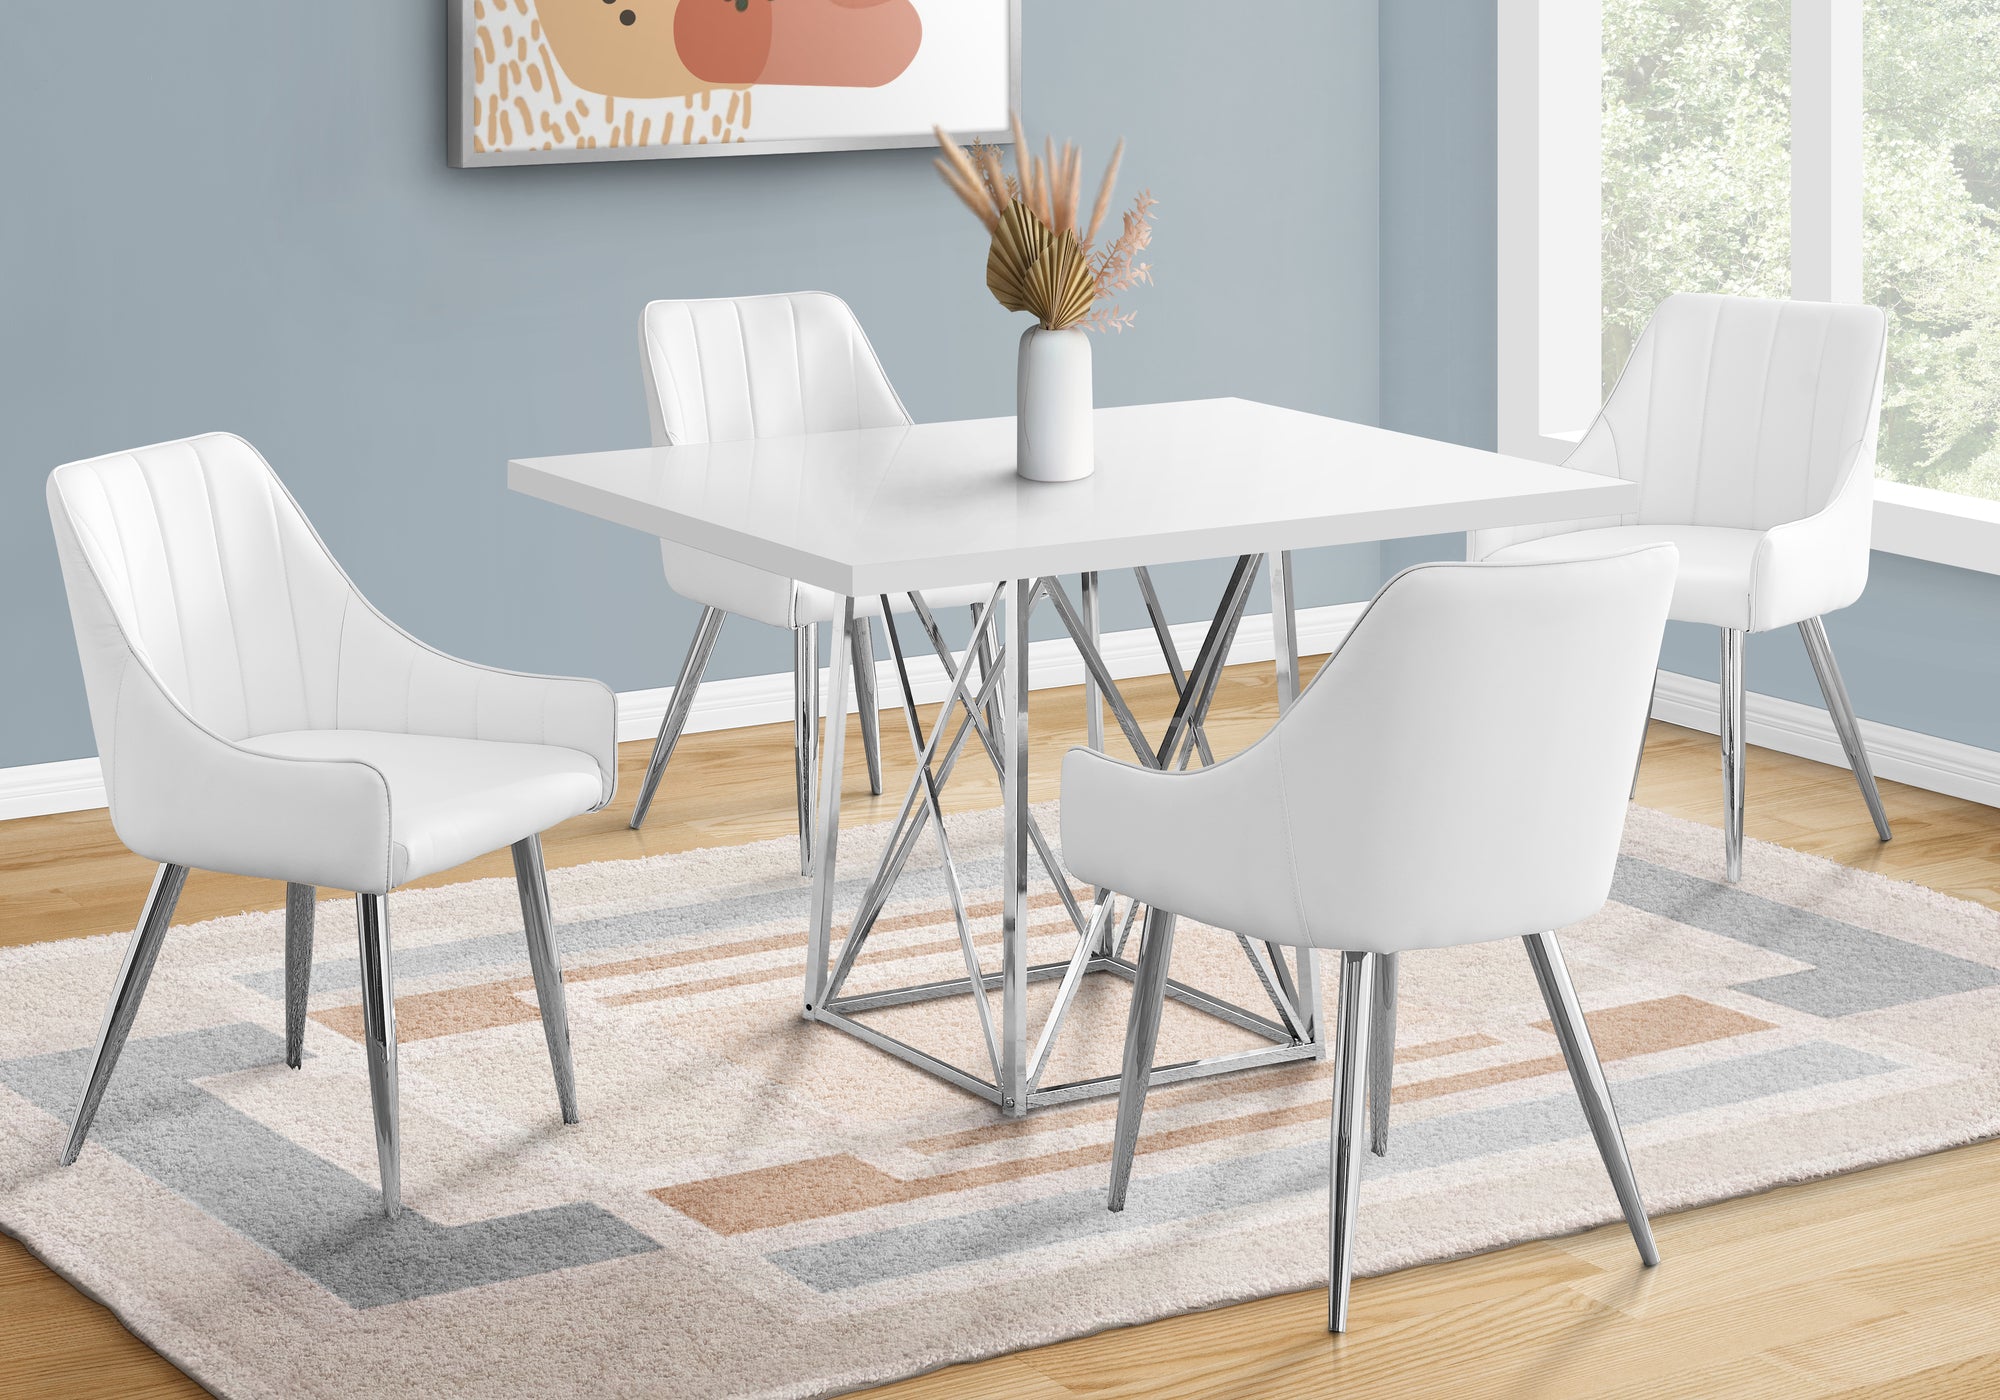 MN-251046    Dining Table, 48" Rectangular, Metal, Kitchen, Dining Room, Metal Base, Laminate, Glossy White, Chrome, Contemporary, Modern